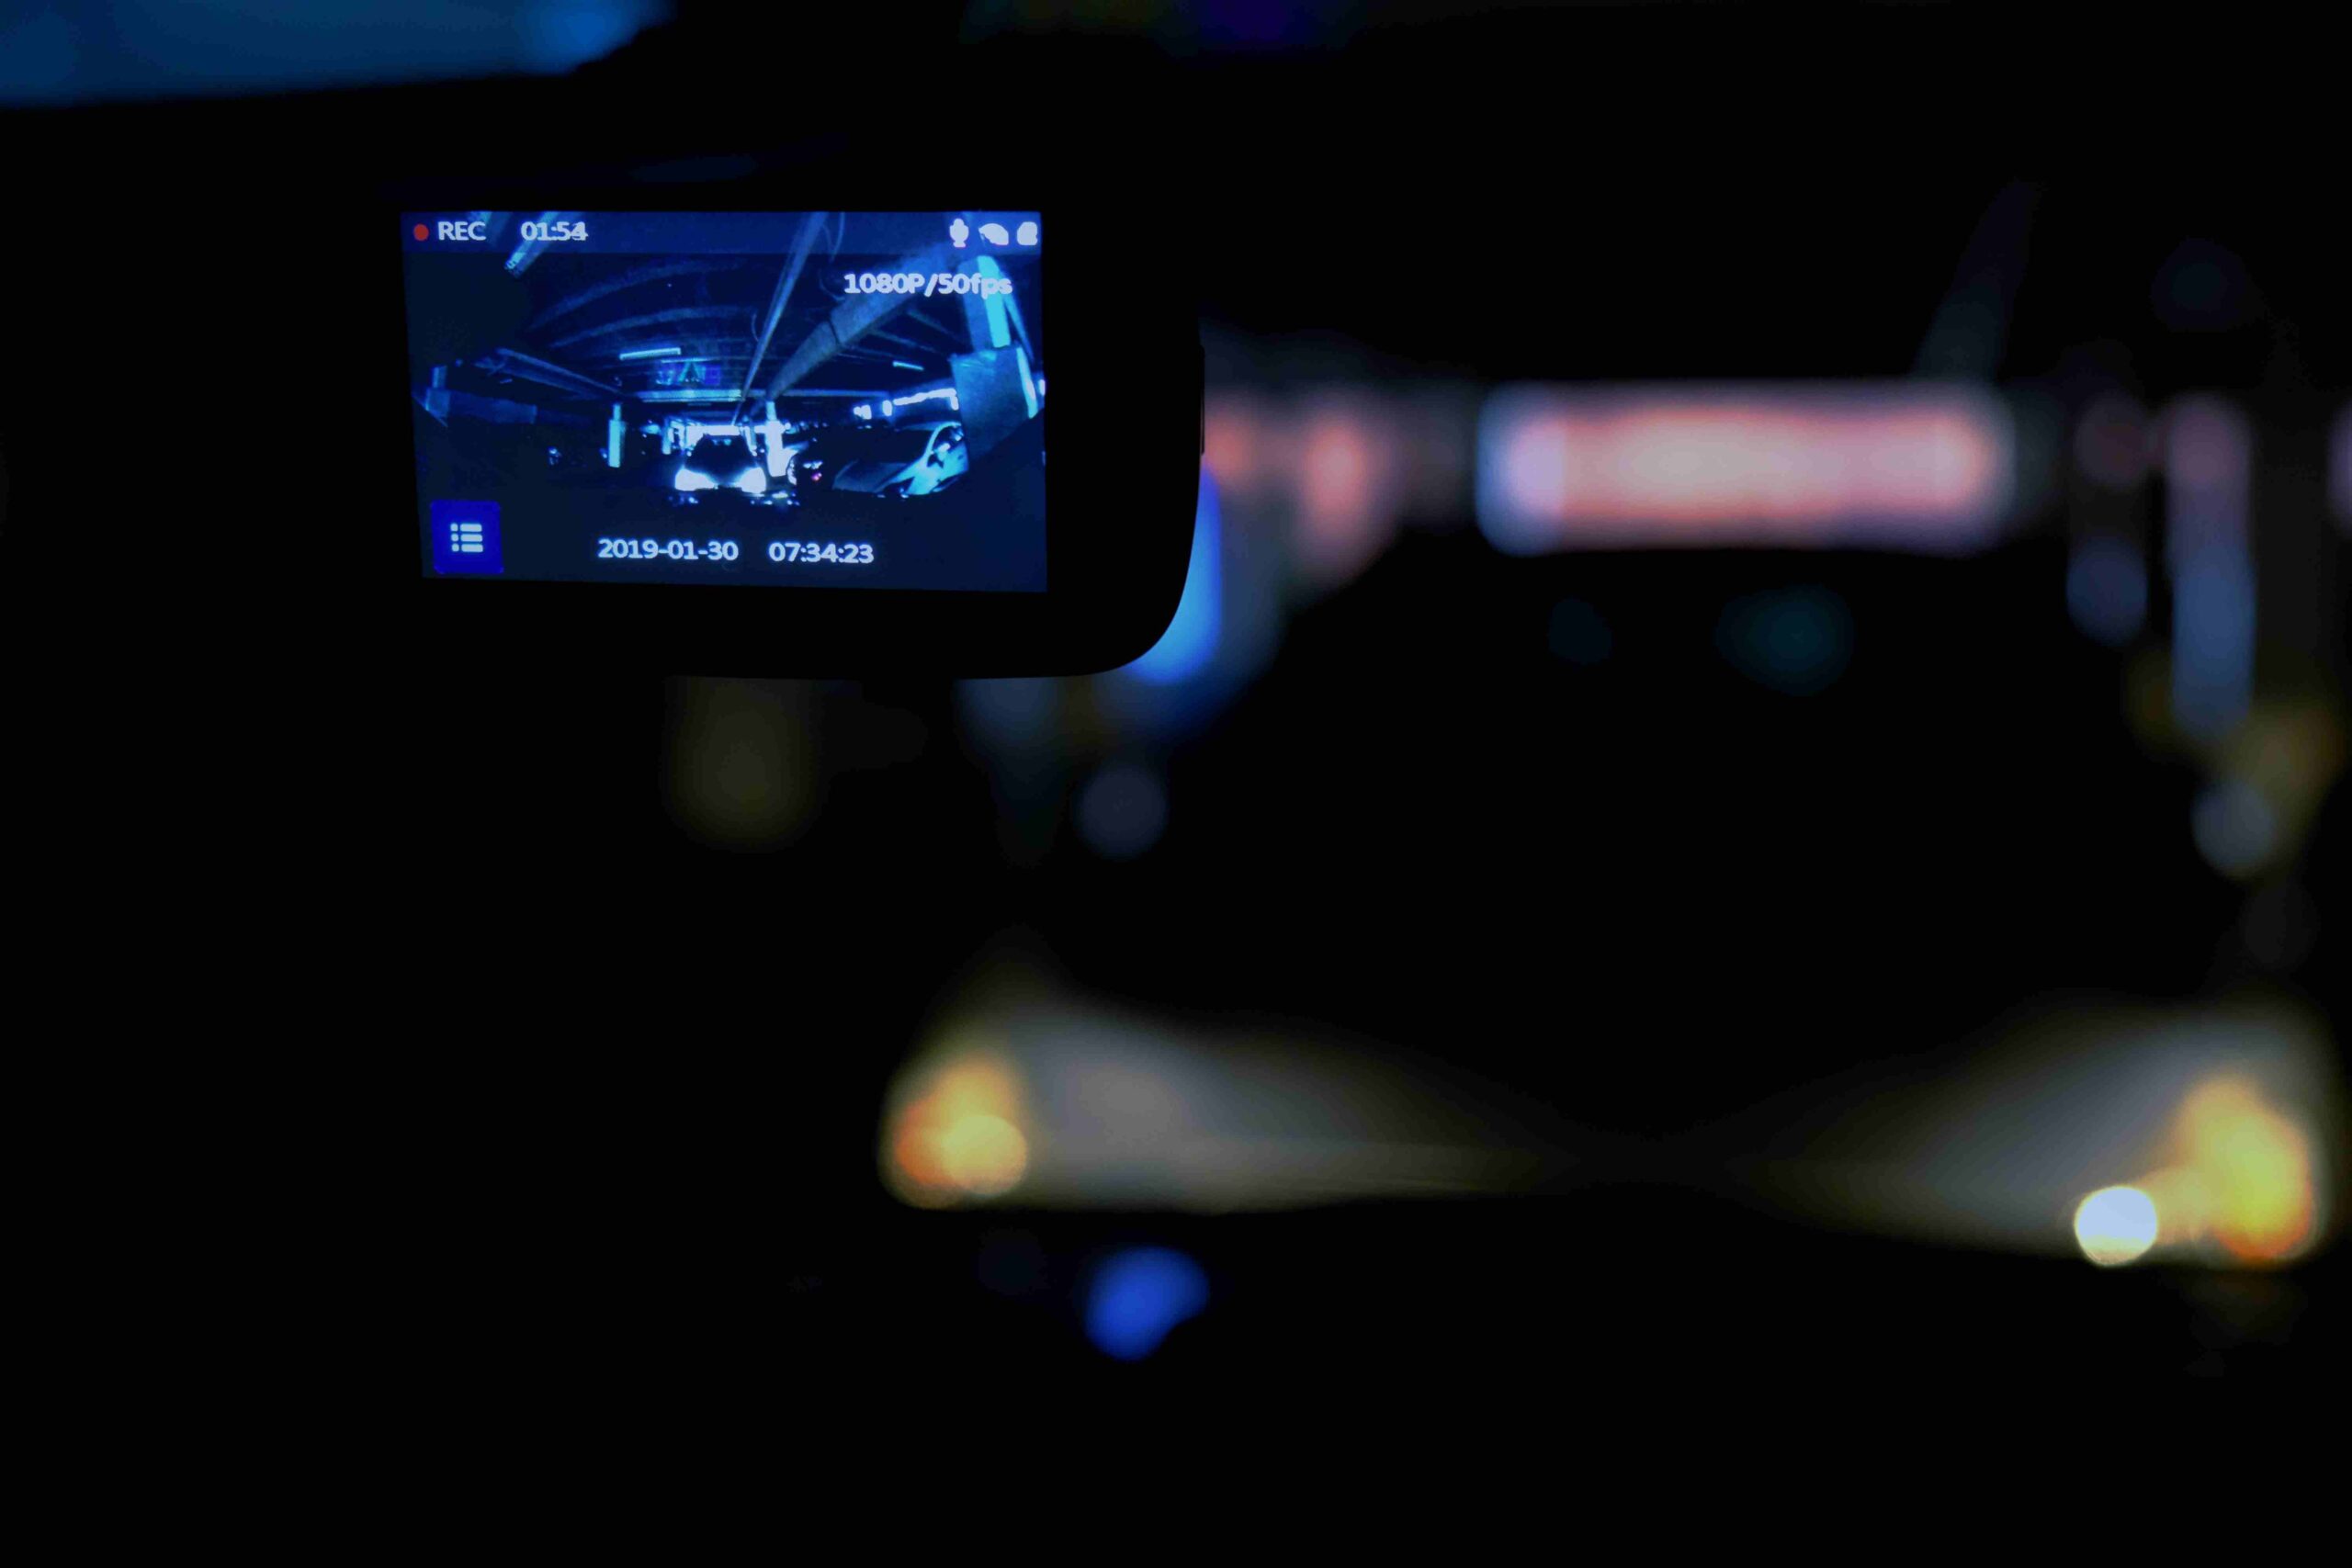 How Can My Dashcam Help My Car Accident Investigation?